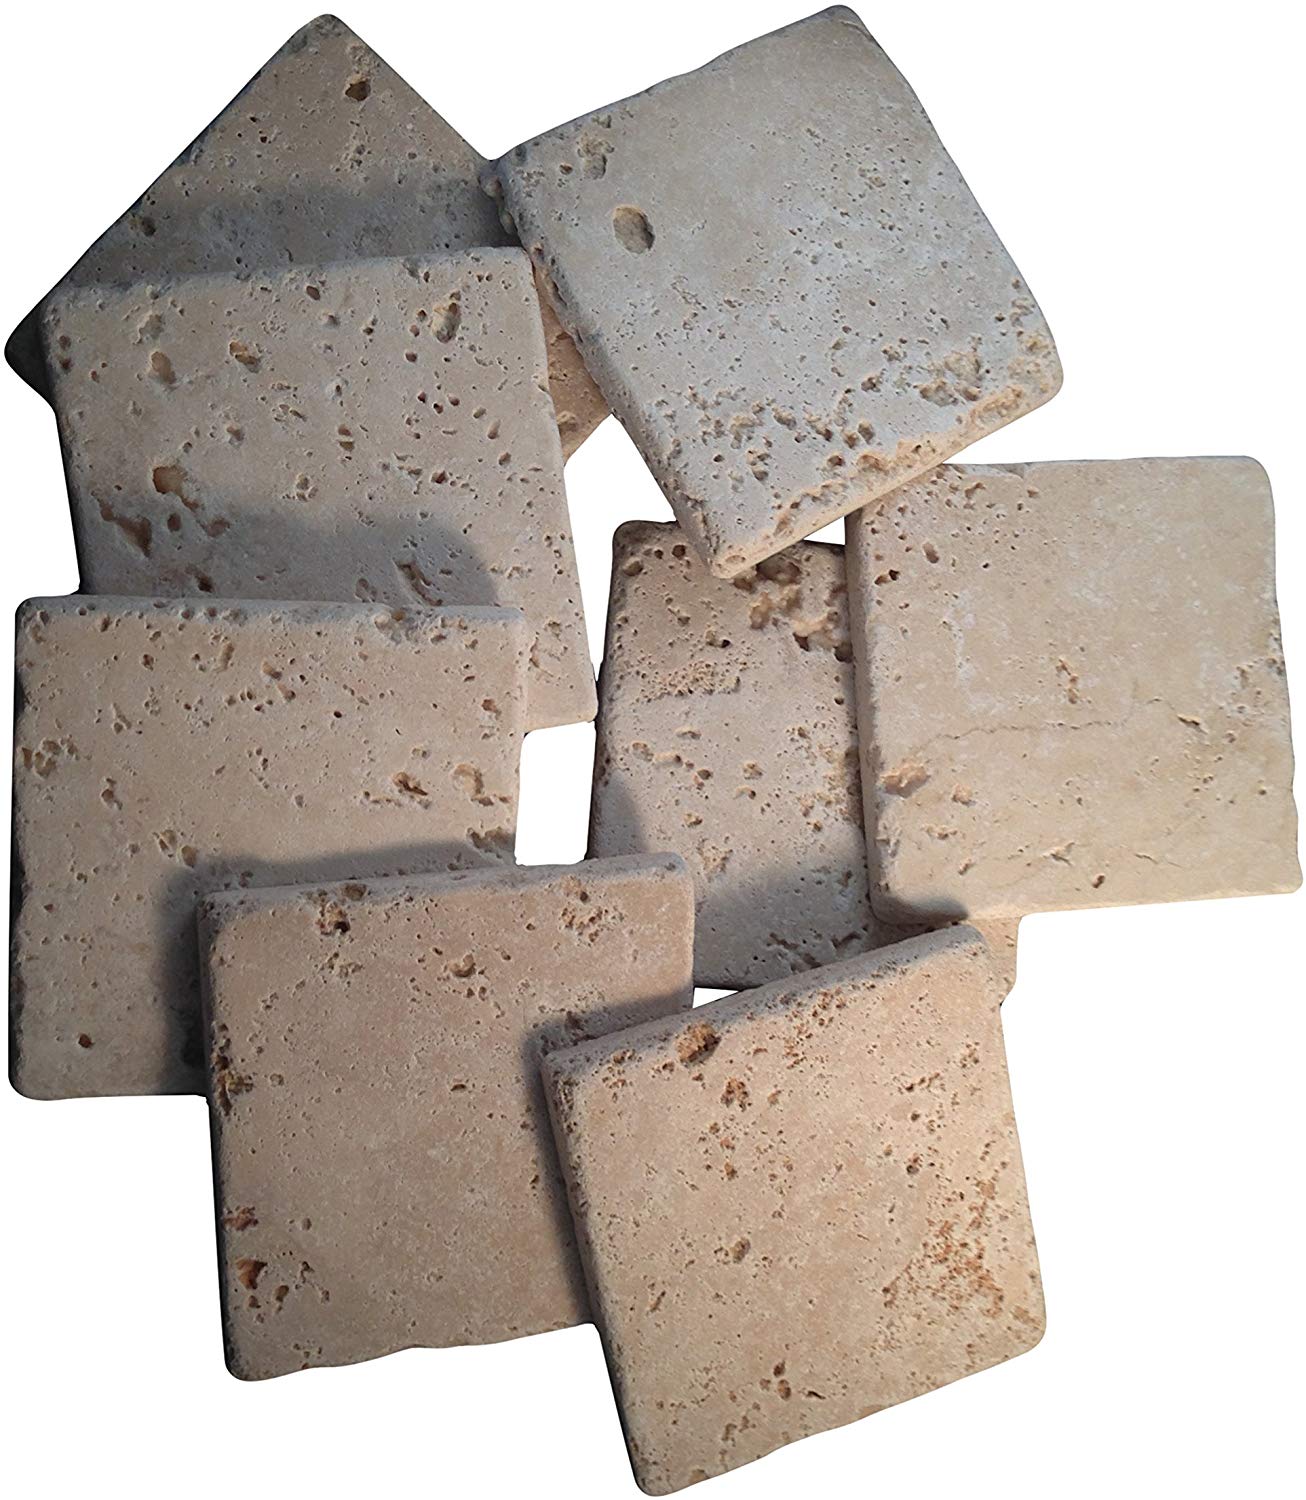 Coaster Tile-tumbled Travertine Porous Craft Floor Wall Tile in Ivory Color -4x4 (8 Pieces)